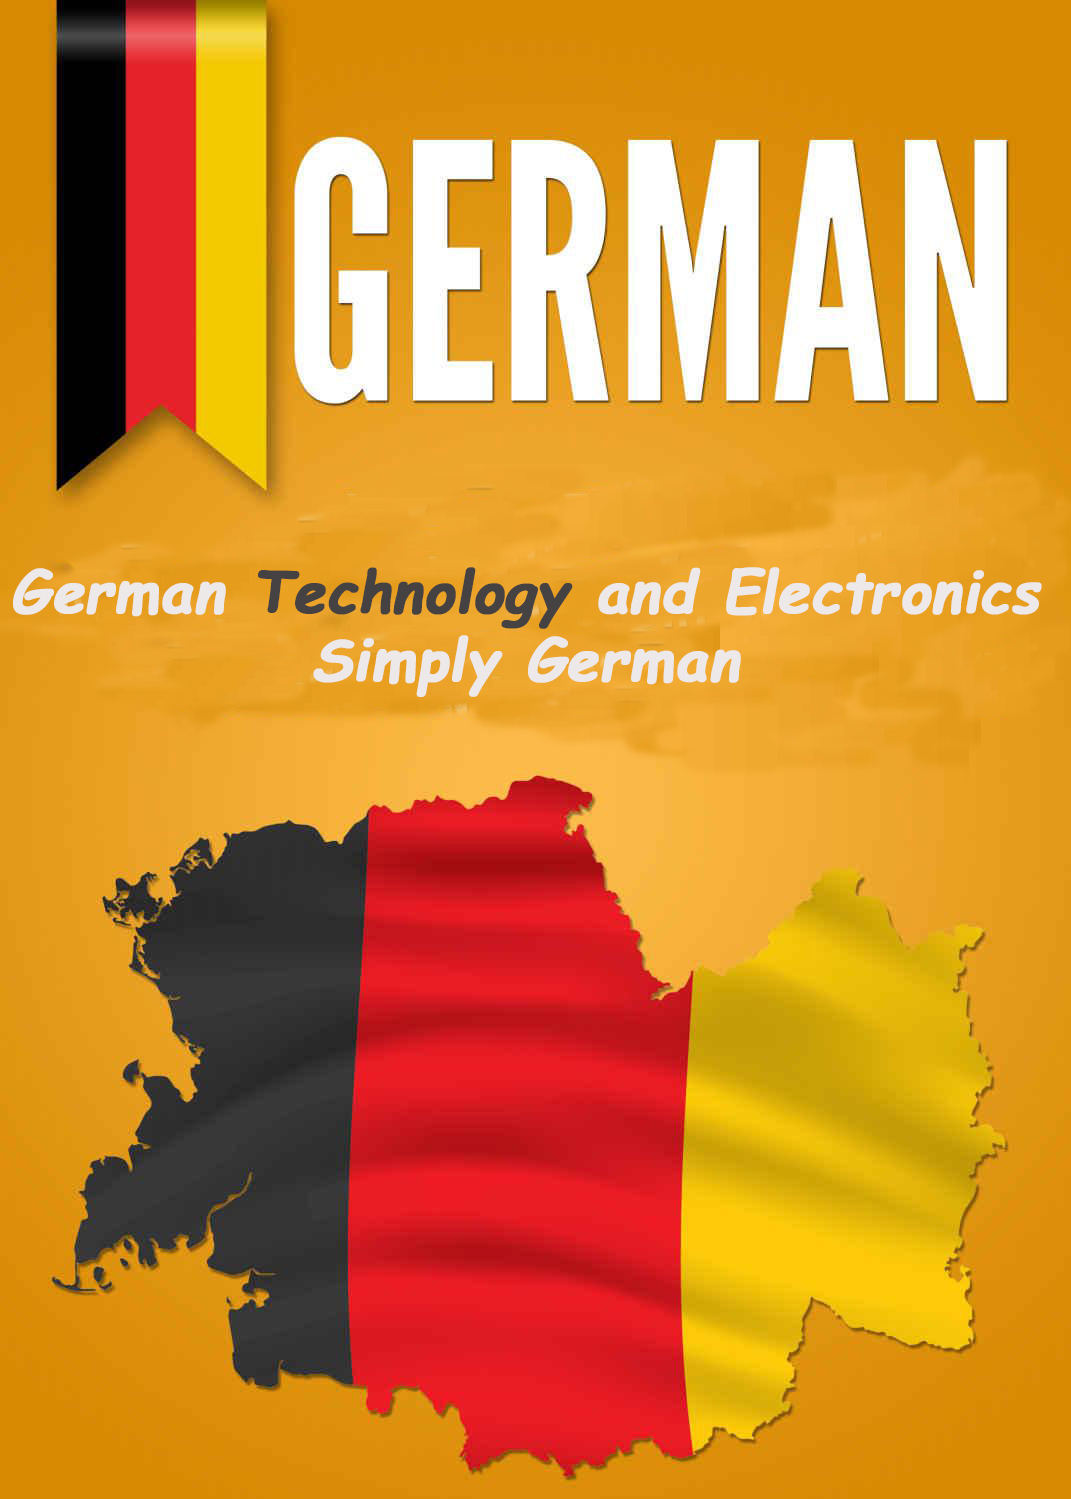 German Technology and Electronics-Simply German